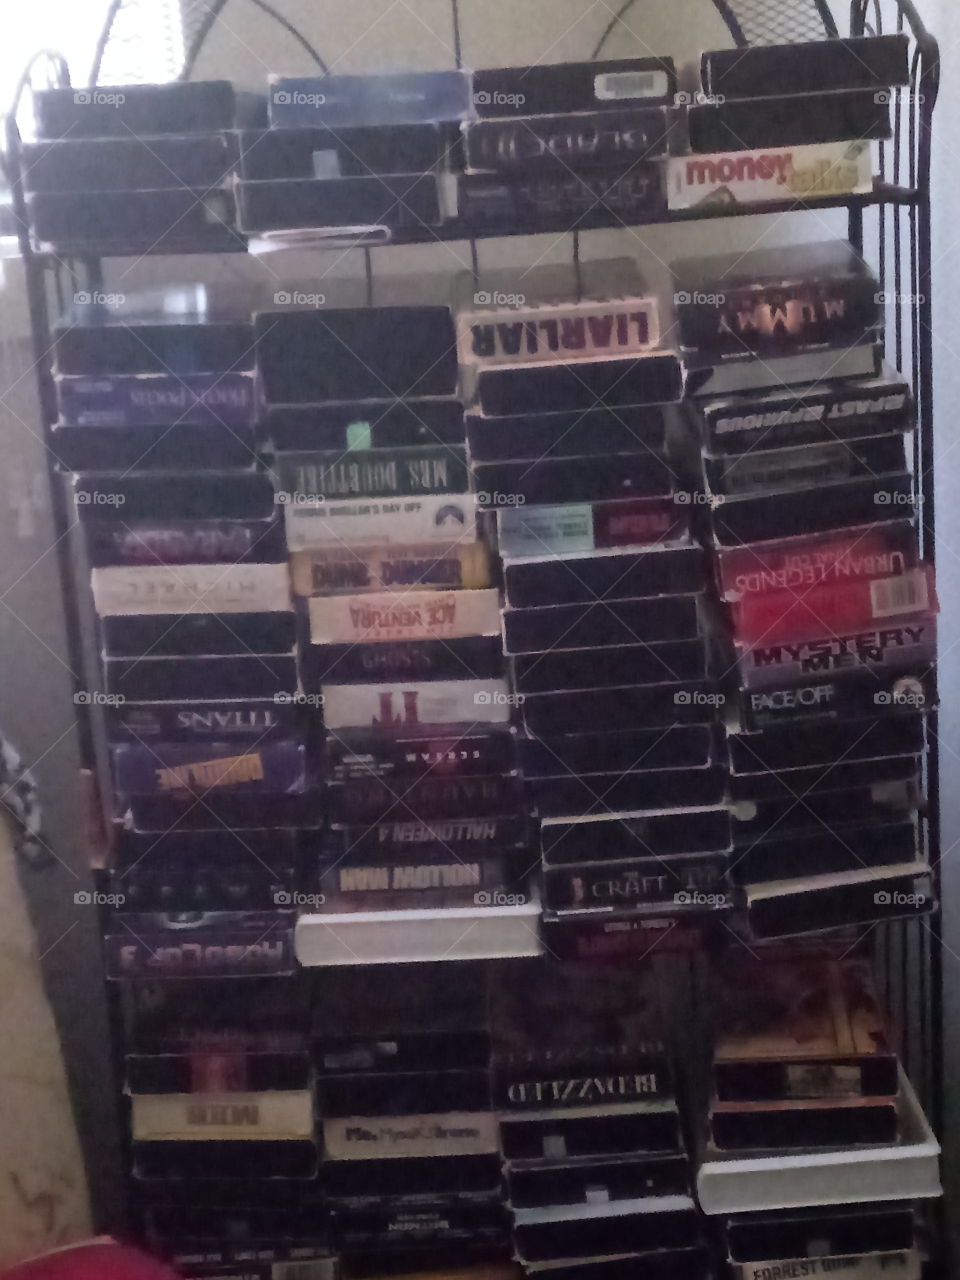 close up of my VHS tapes that are out